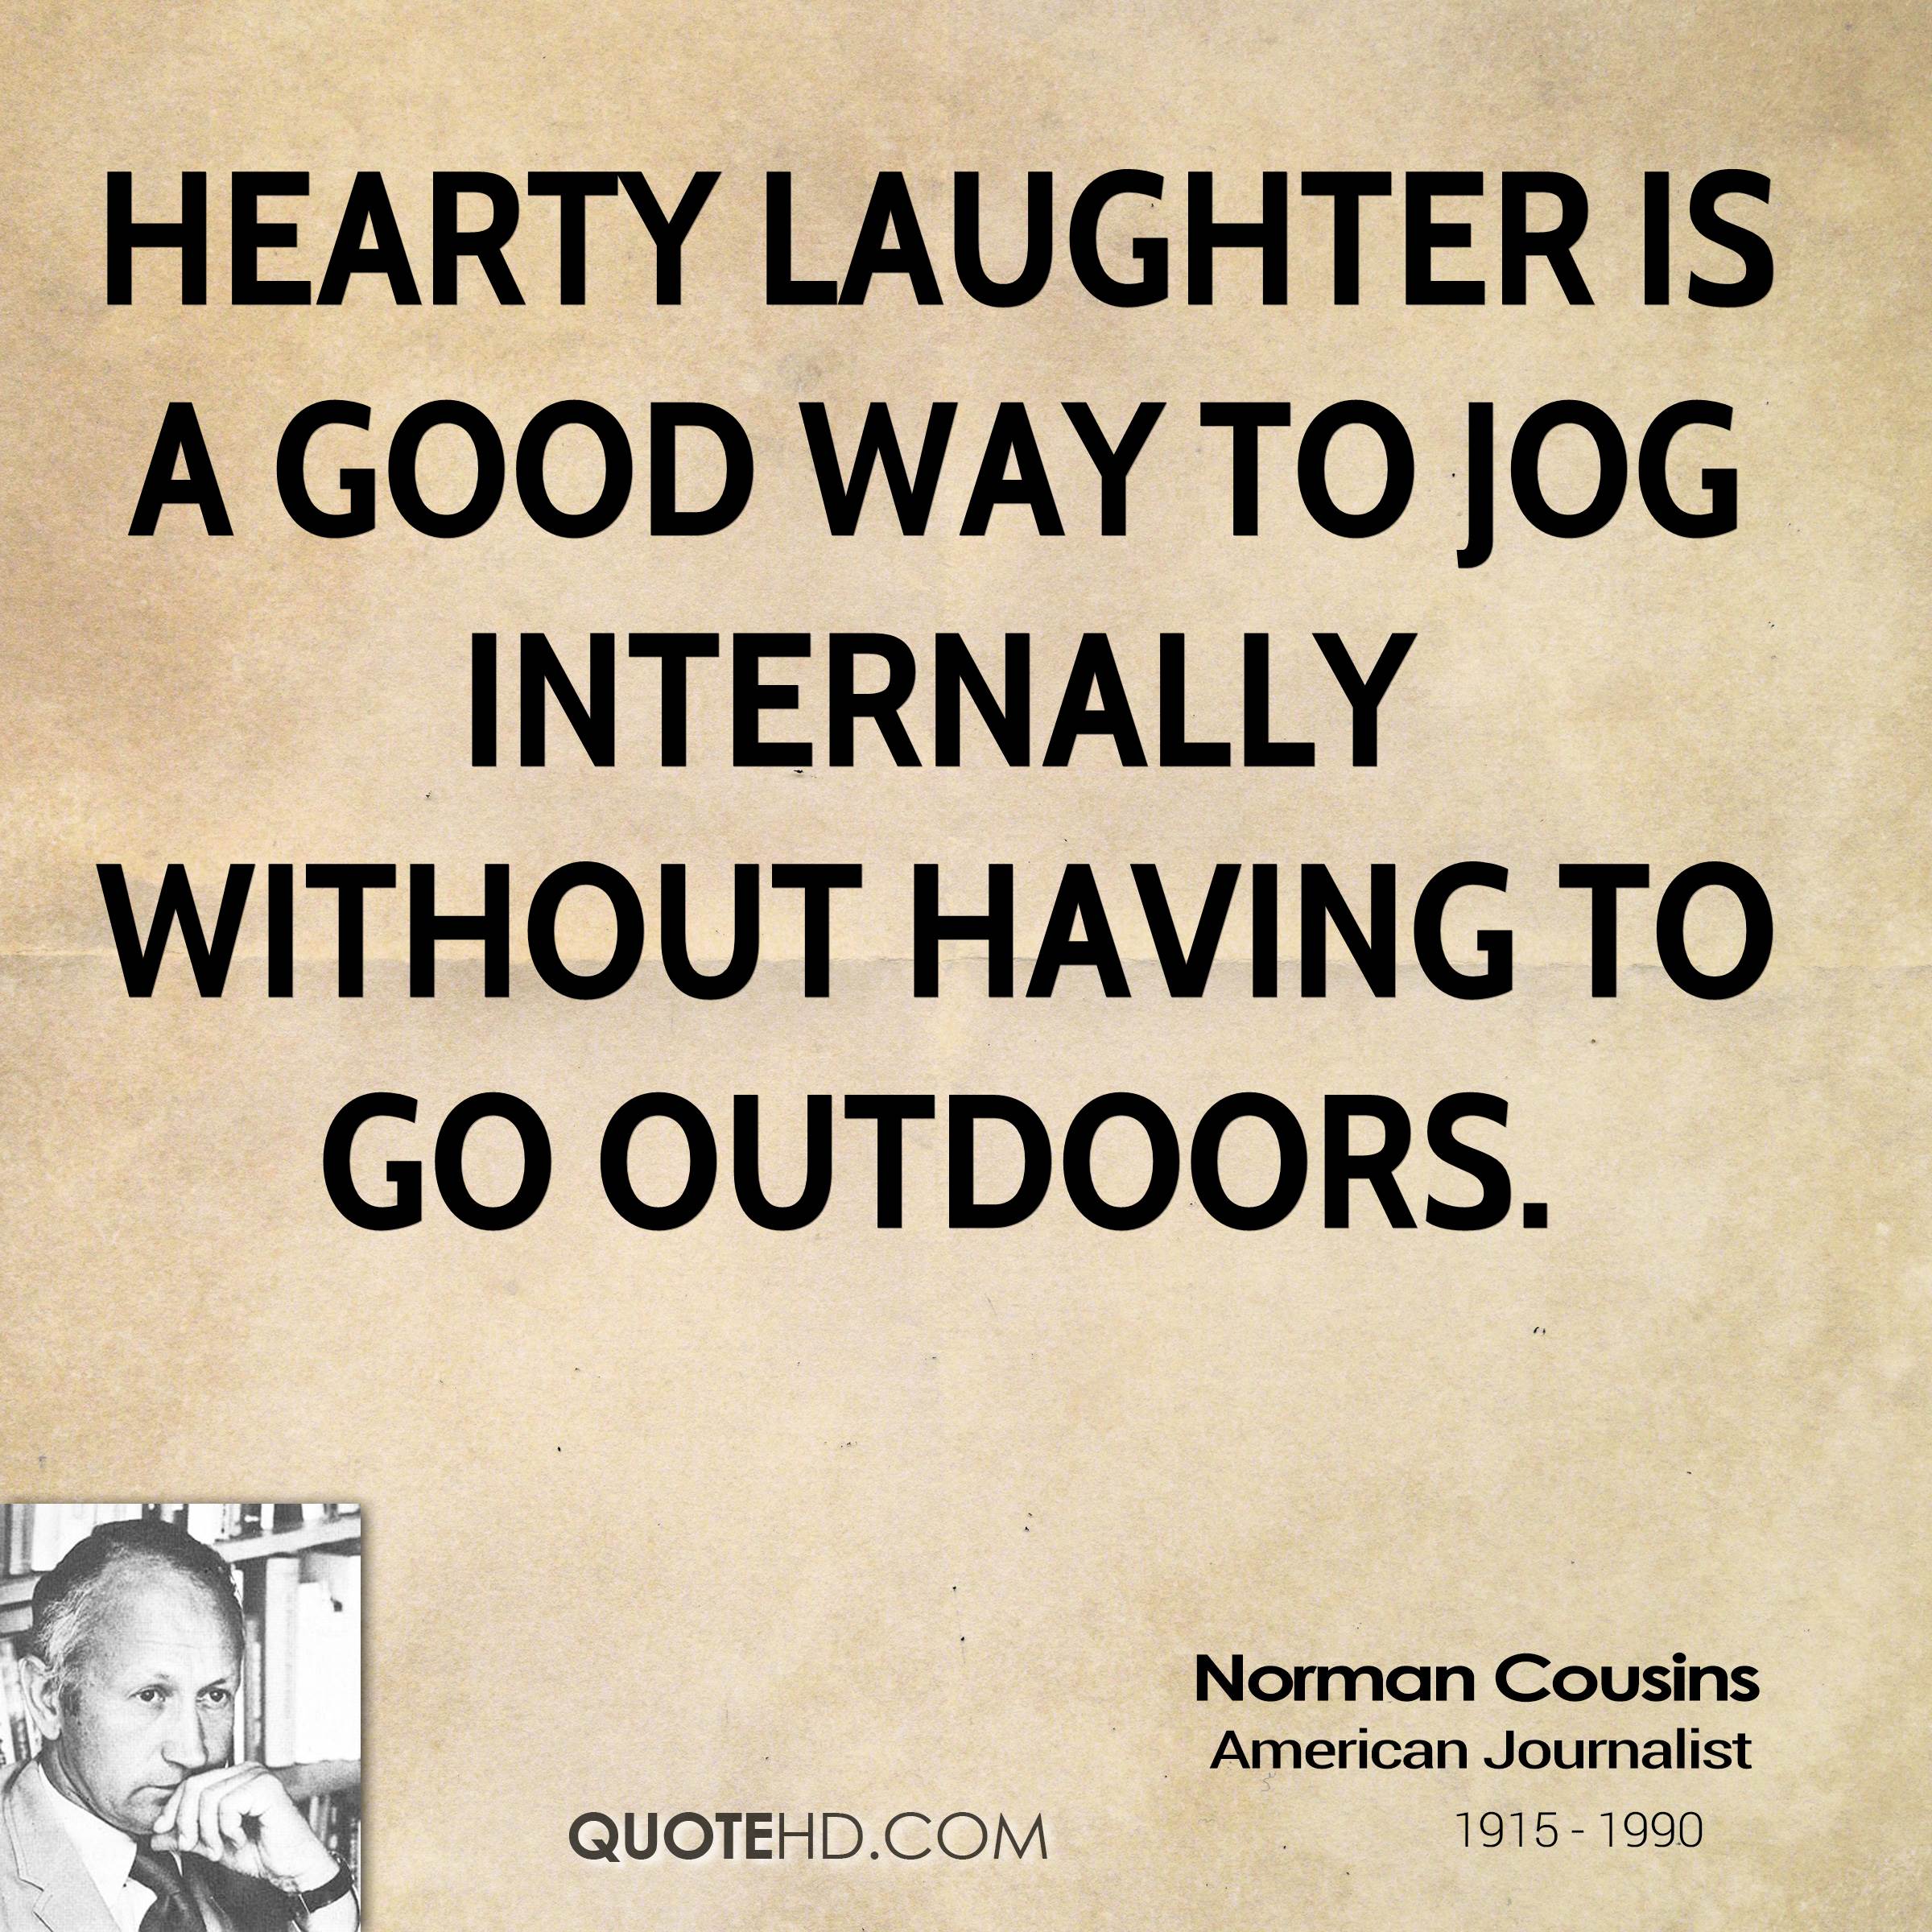 Norman Cousins Quotes | QuoteHD